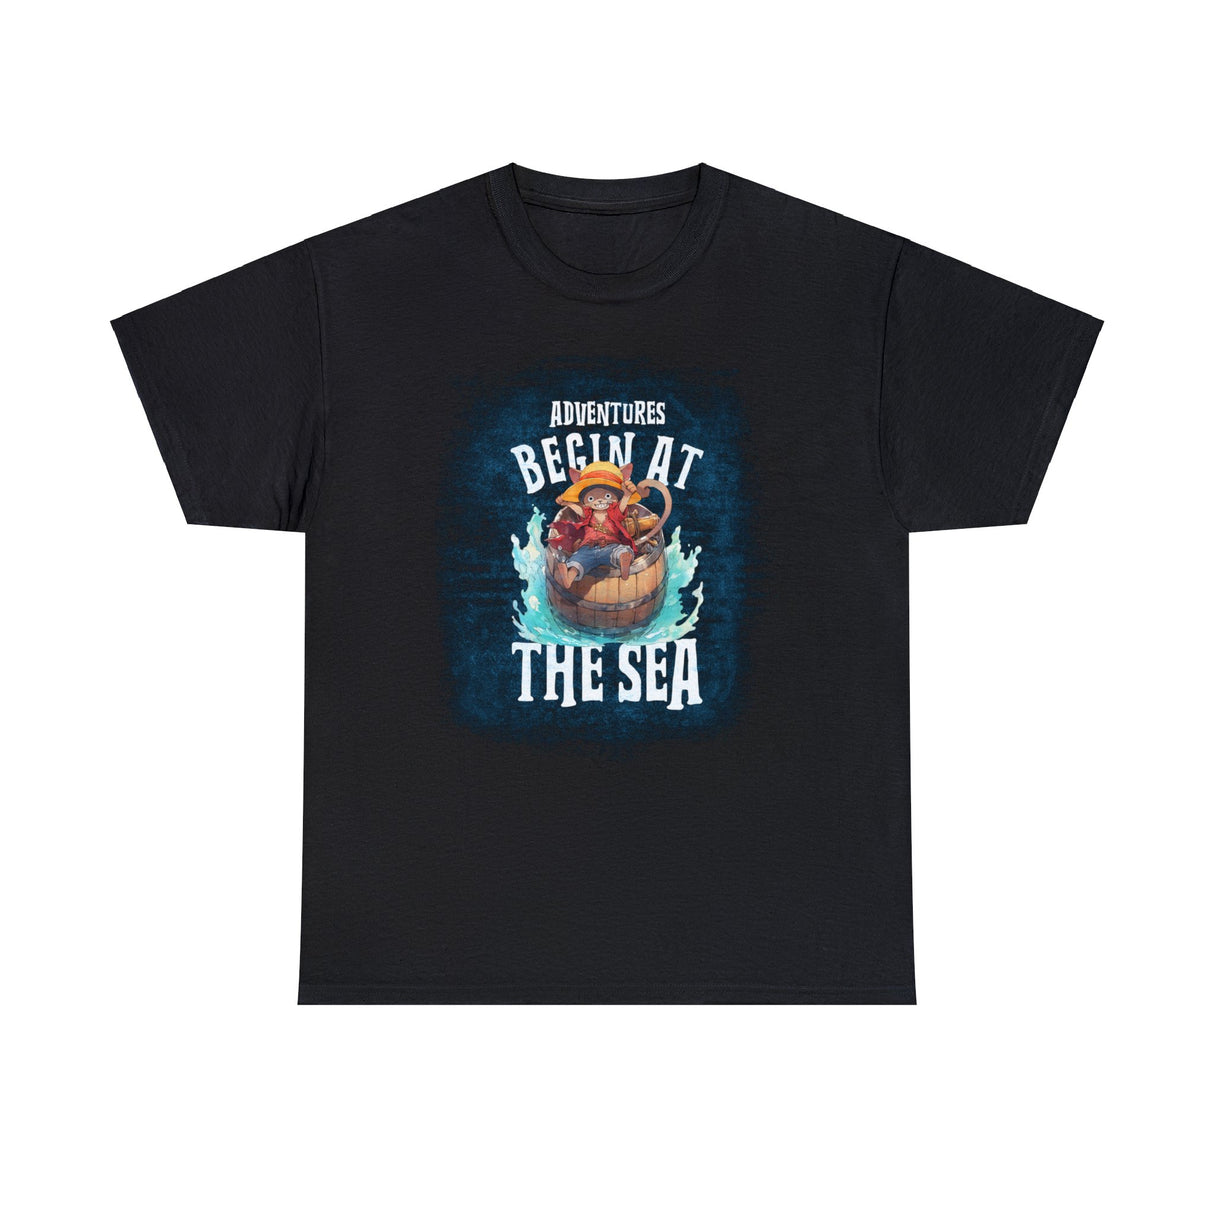 Adventures Begin At The Sea Graphic Tee Shirt